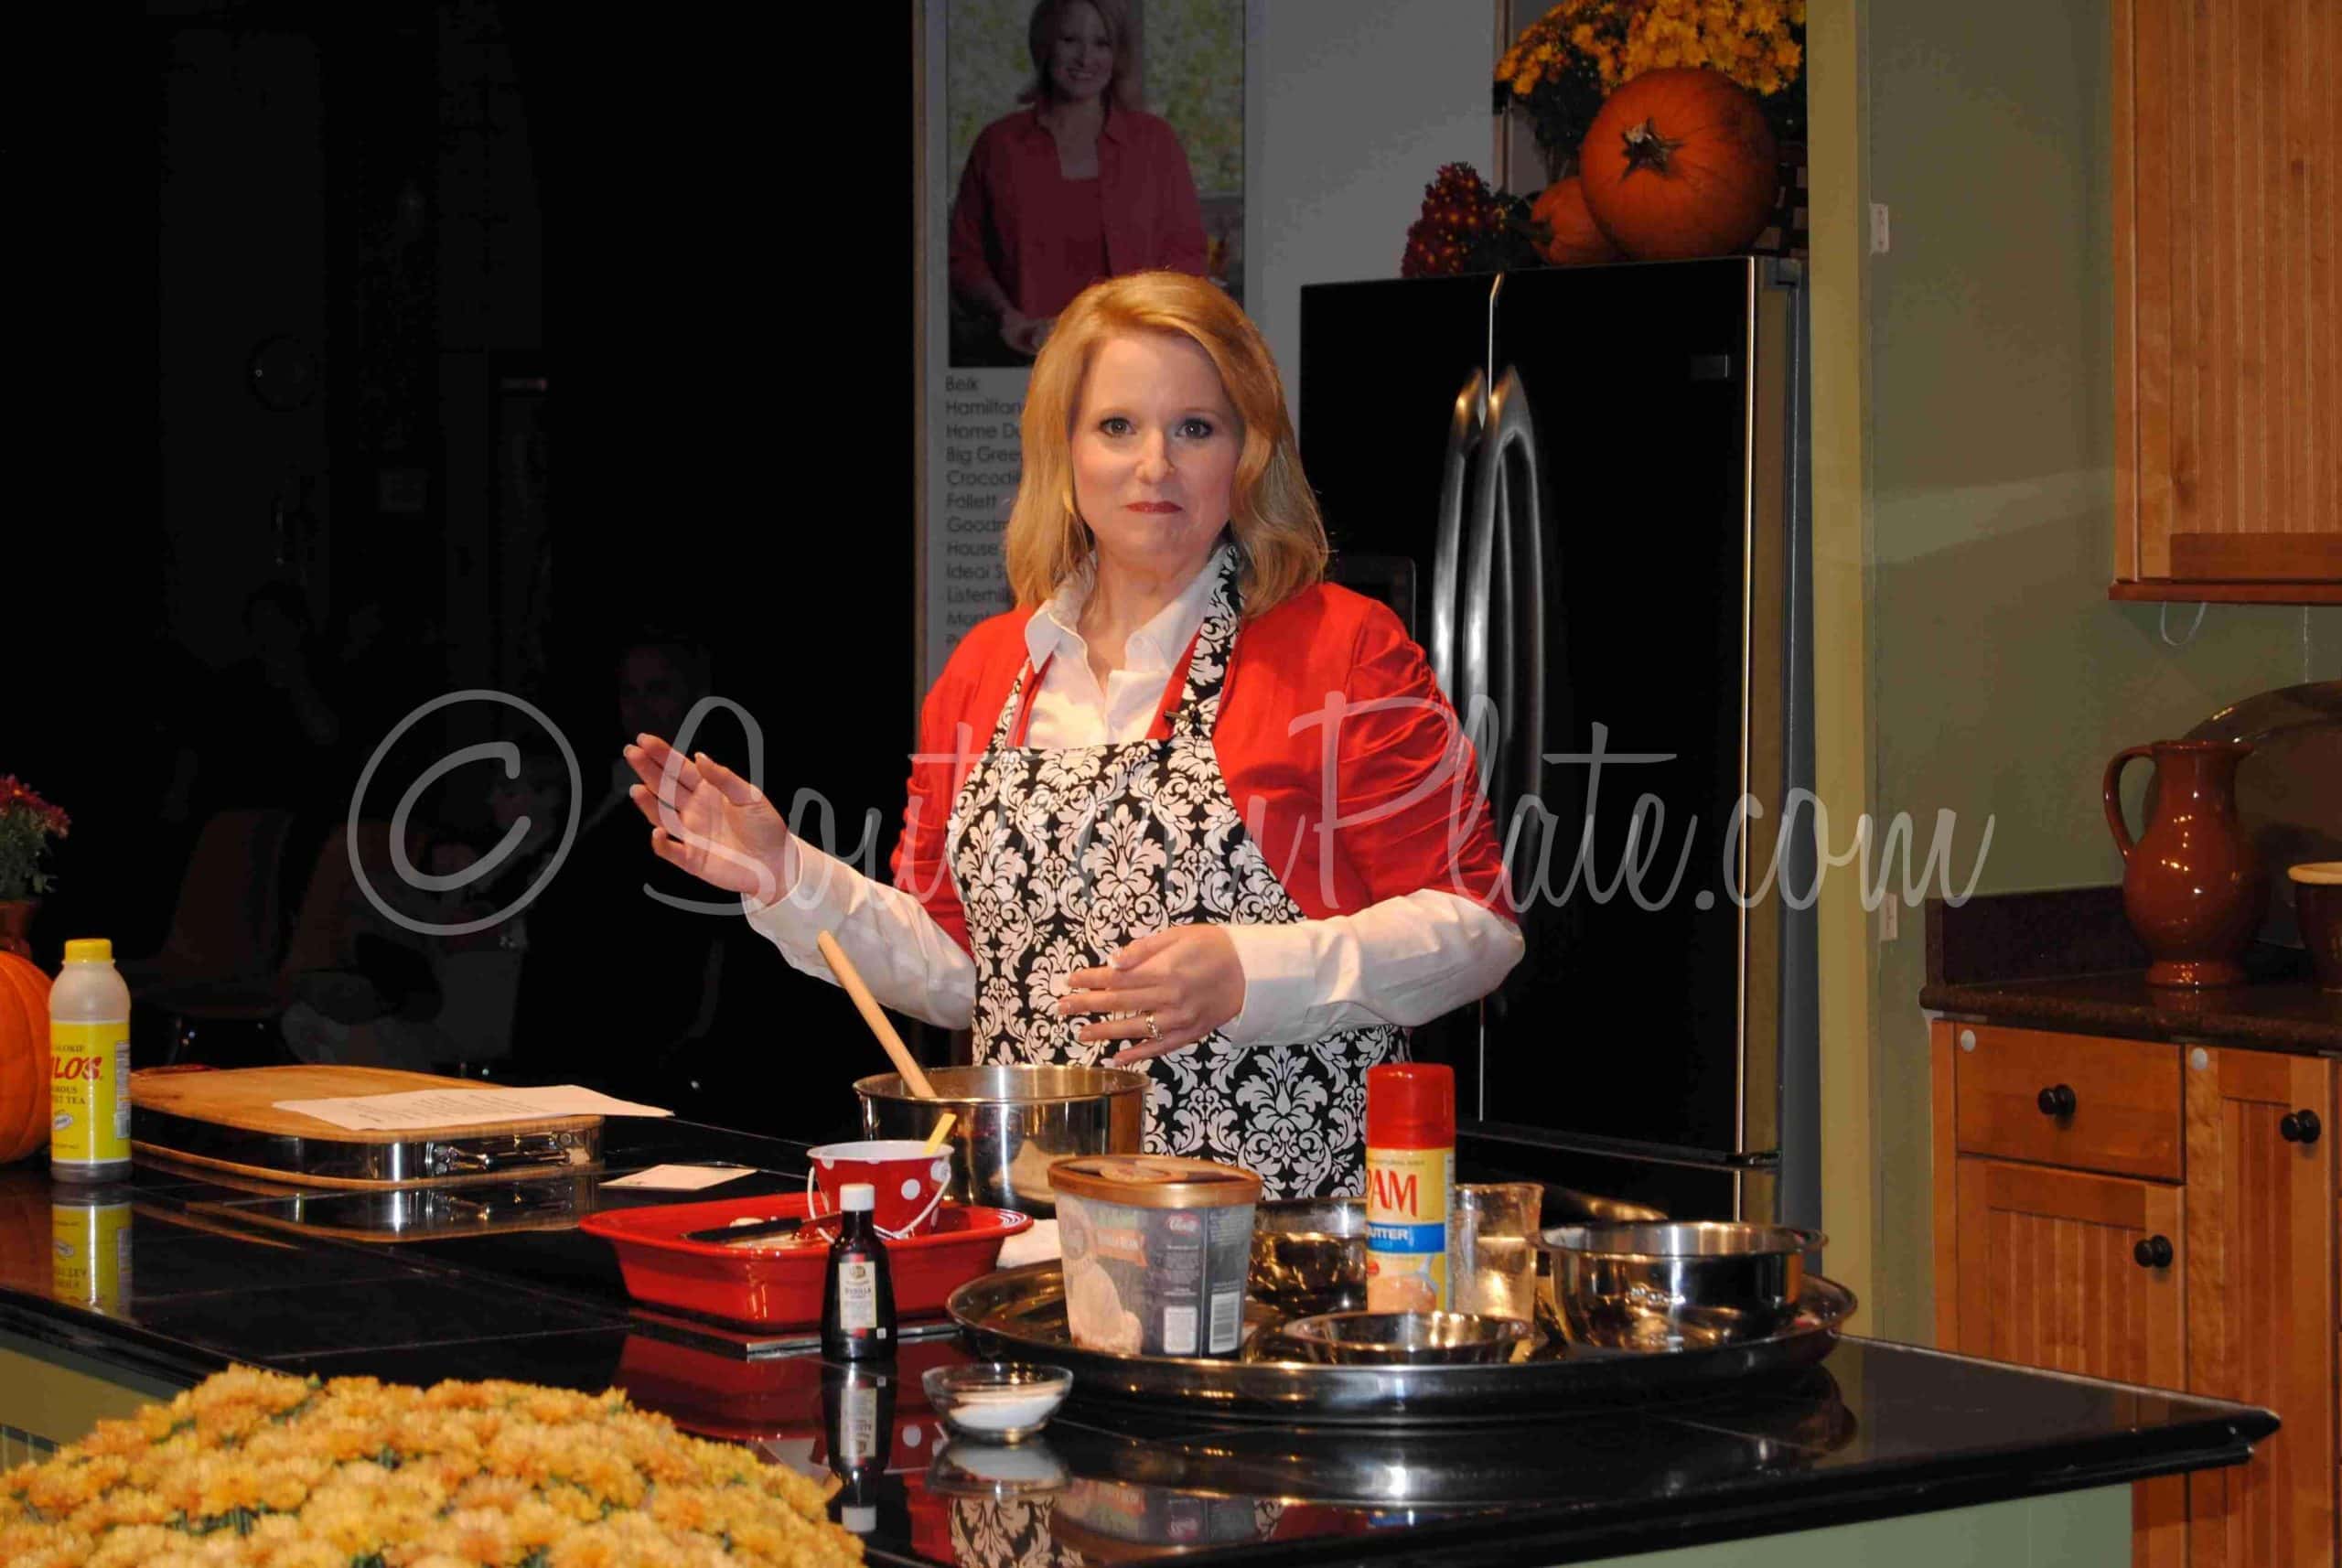 Pictures from the Cooking Show!